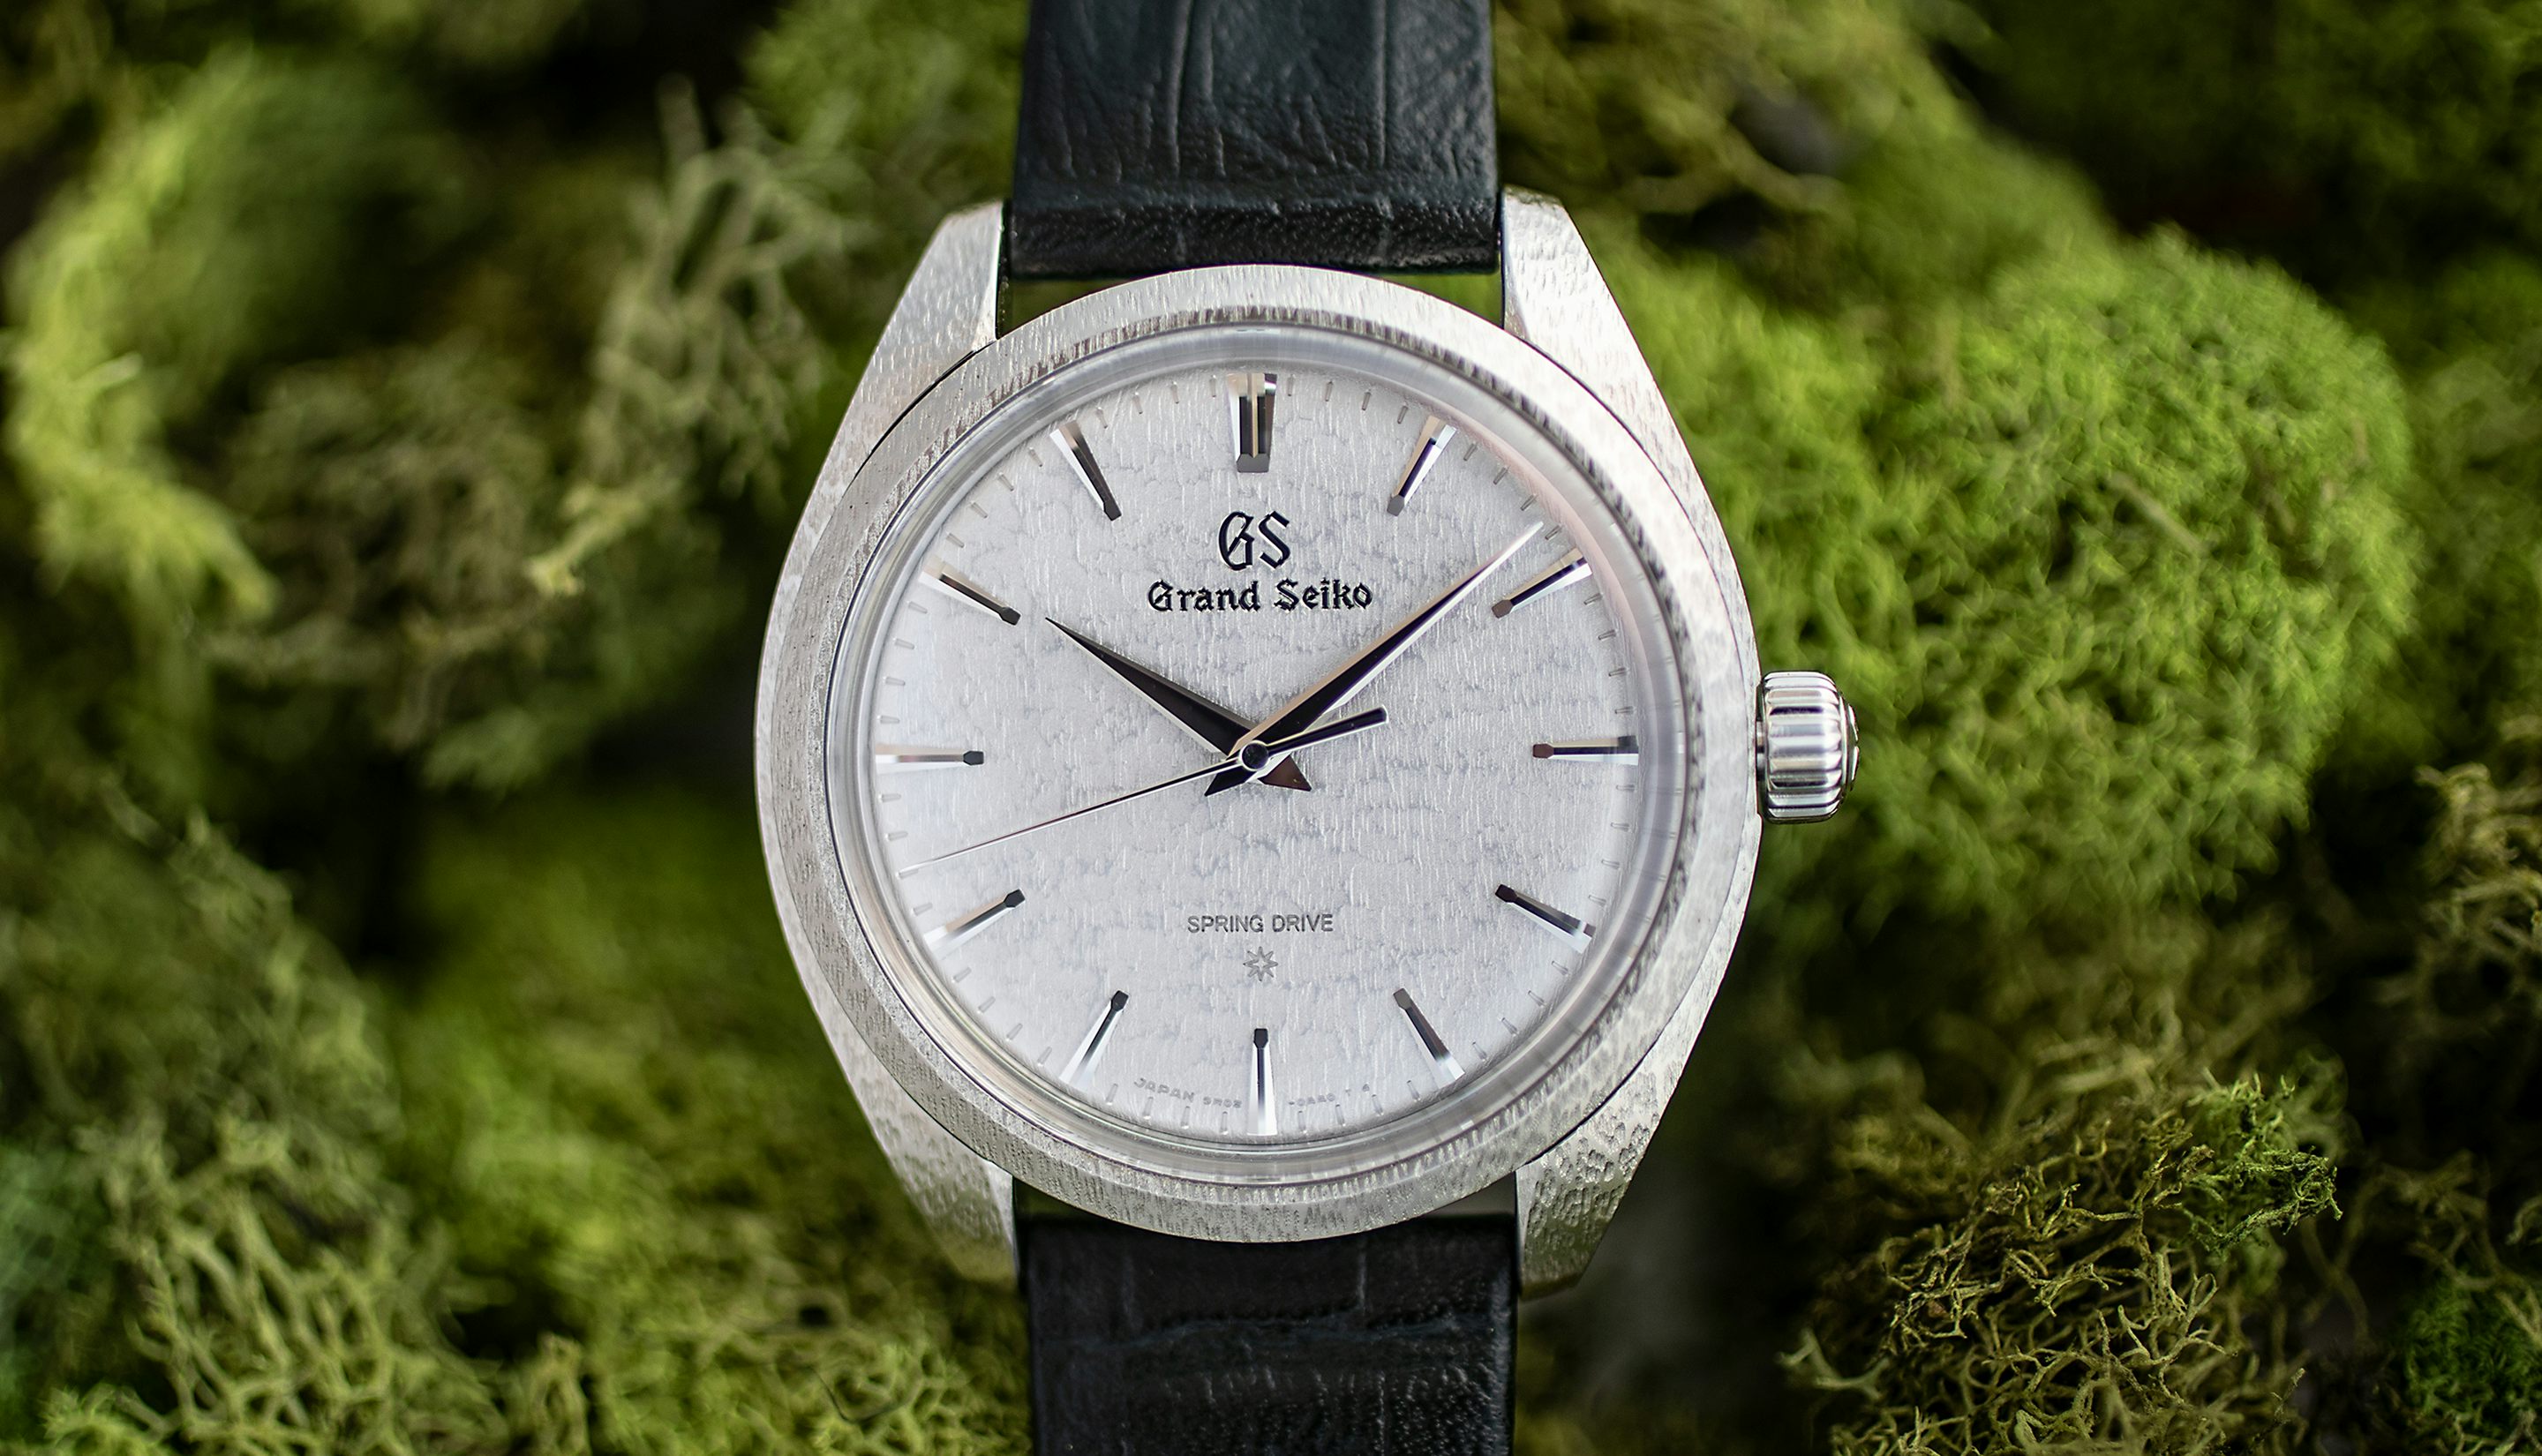 Introducing: The Grand Seiko 20th Anniversary Of Spring Drive